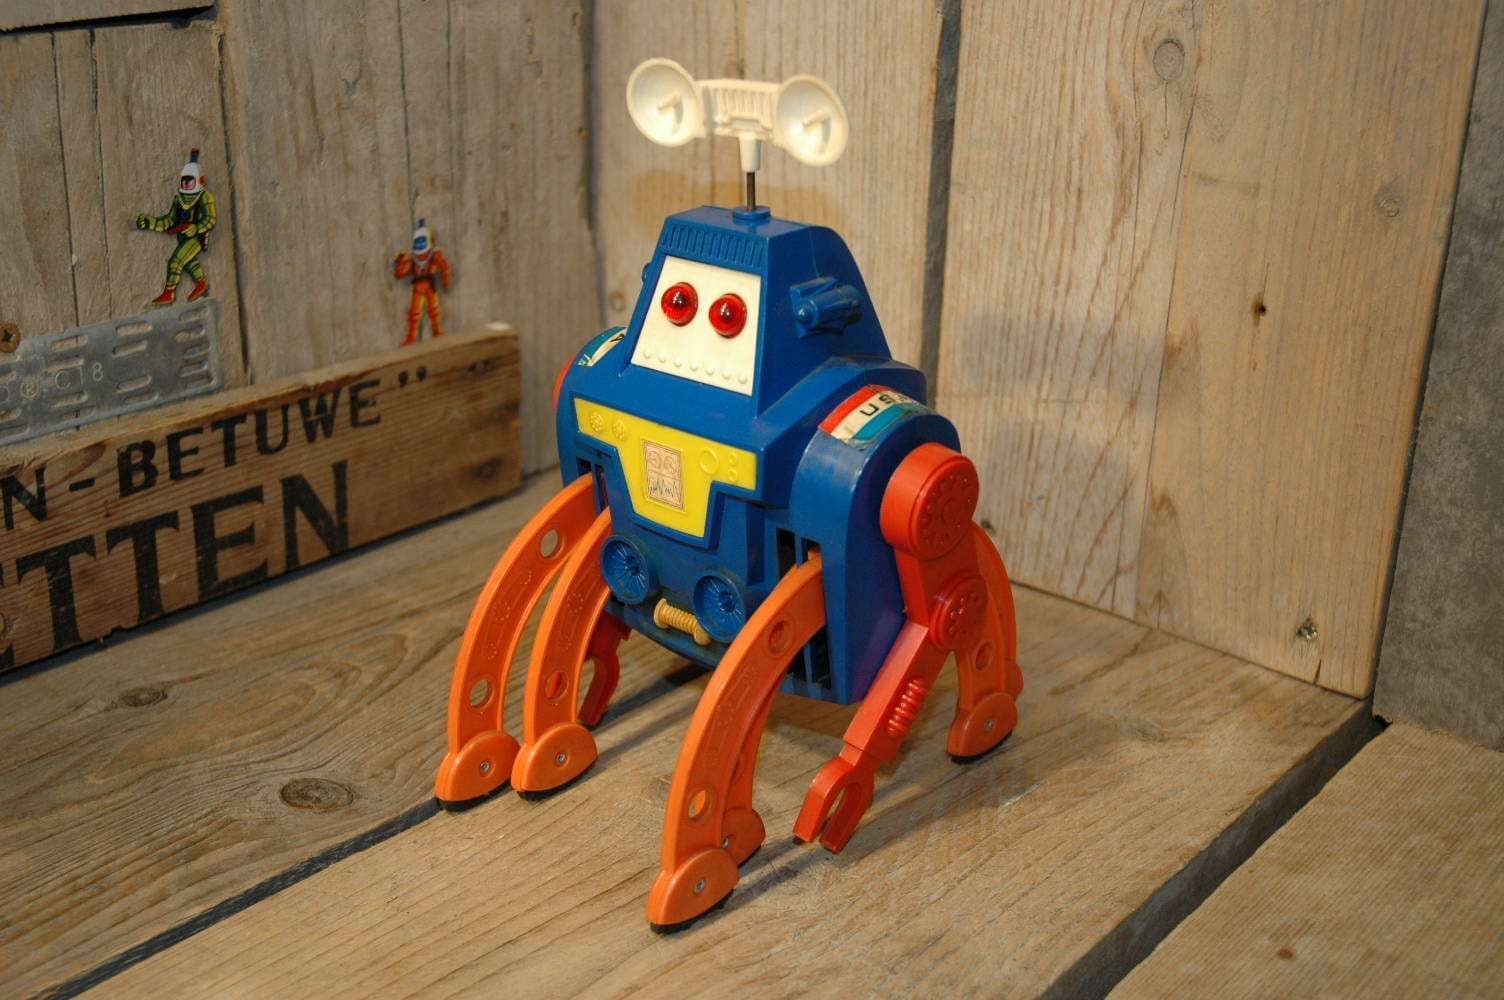 Amico - Walking Space Robot